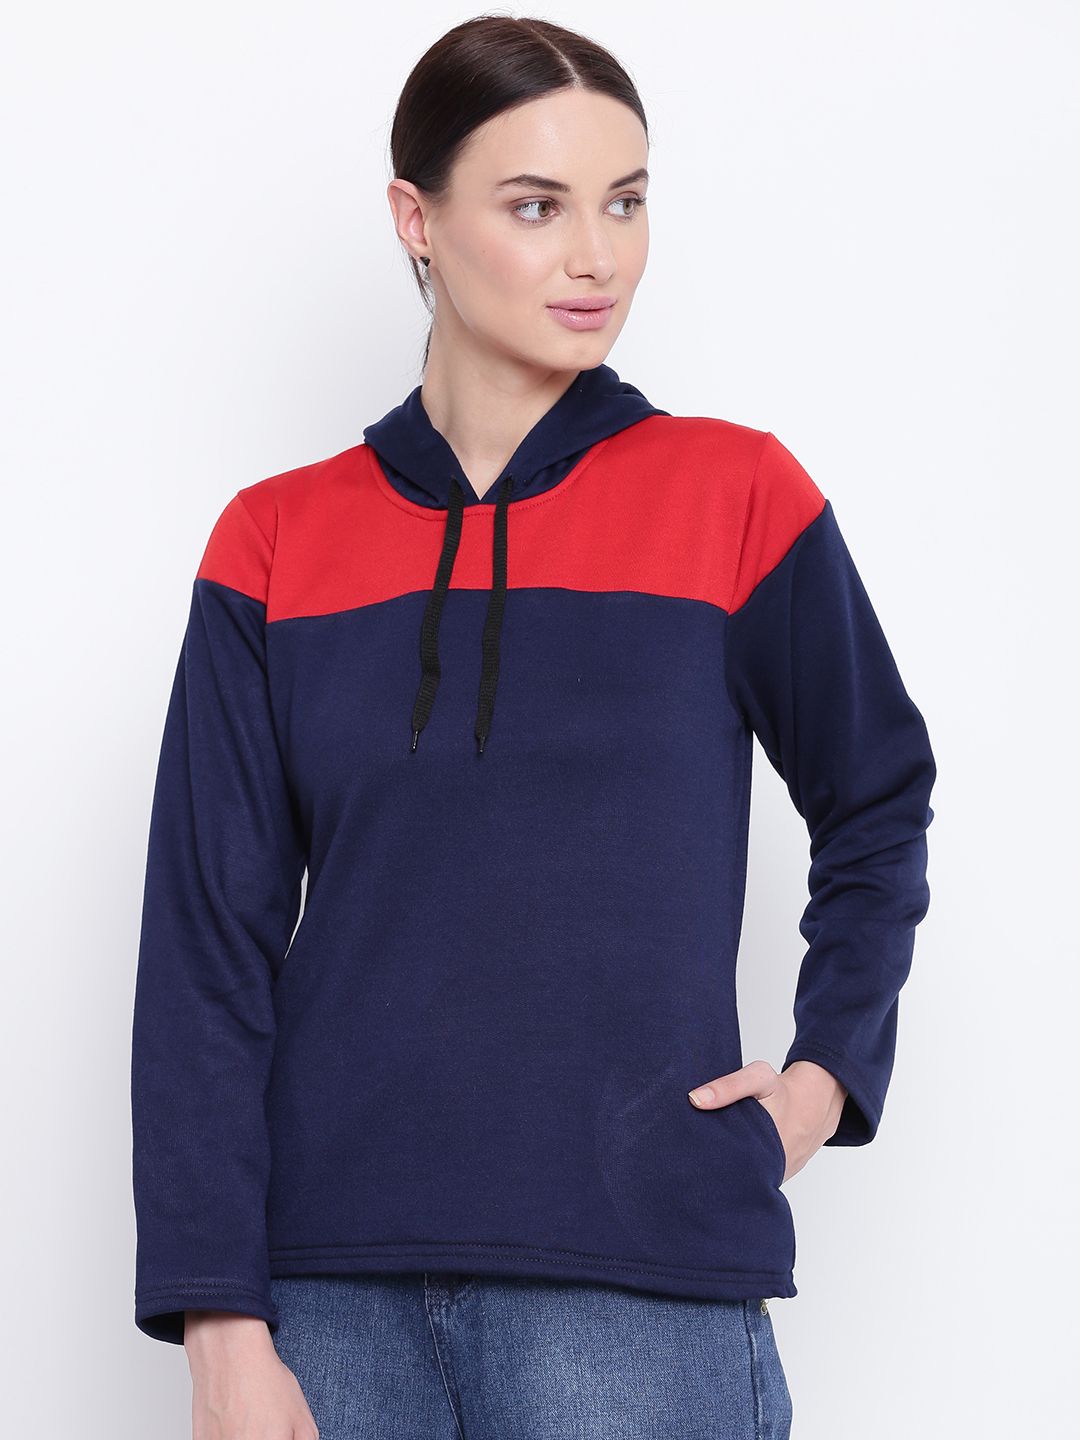 Belle Fille Women Navy Blue & Red Colourblocked Hooded Sweatshirt Price in India